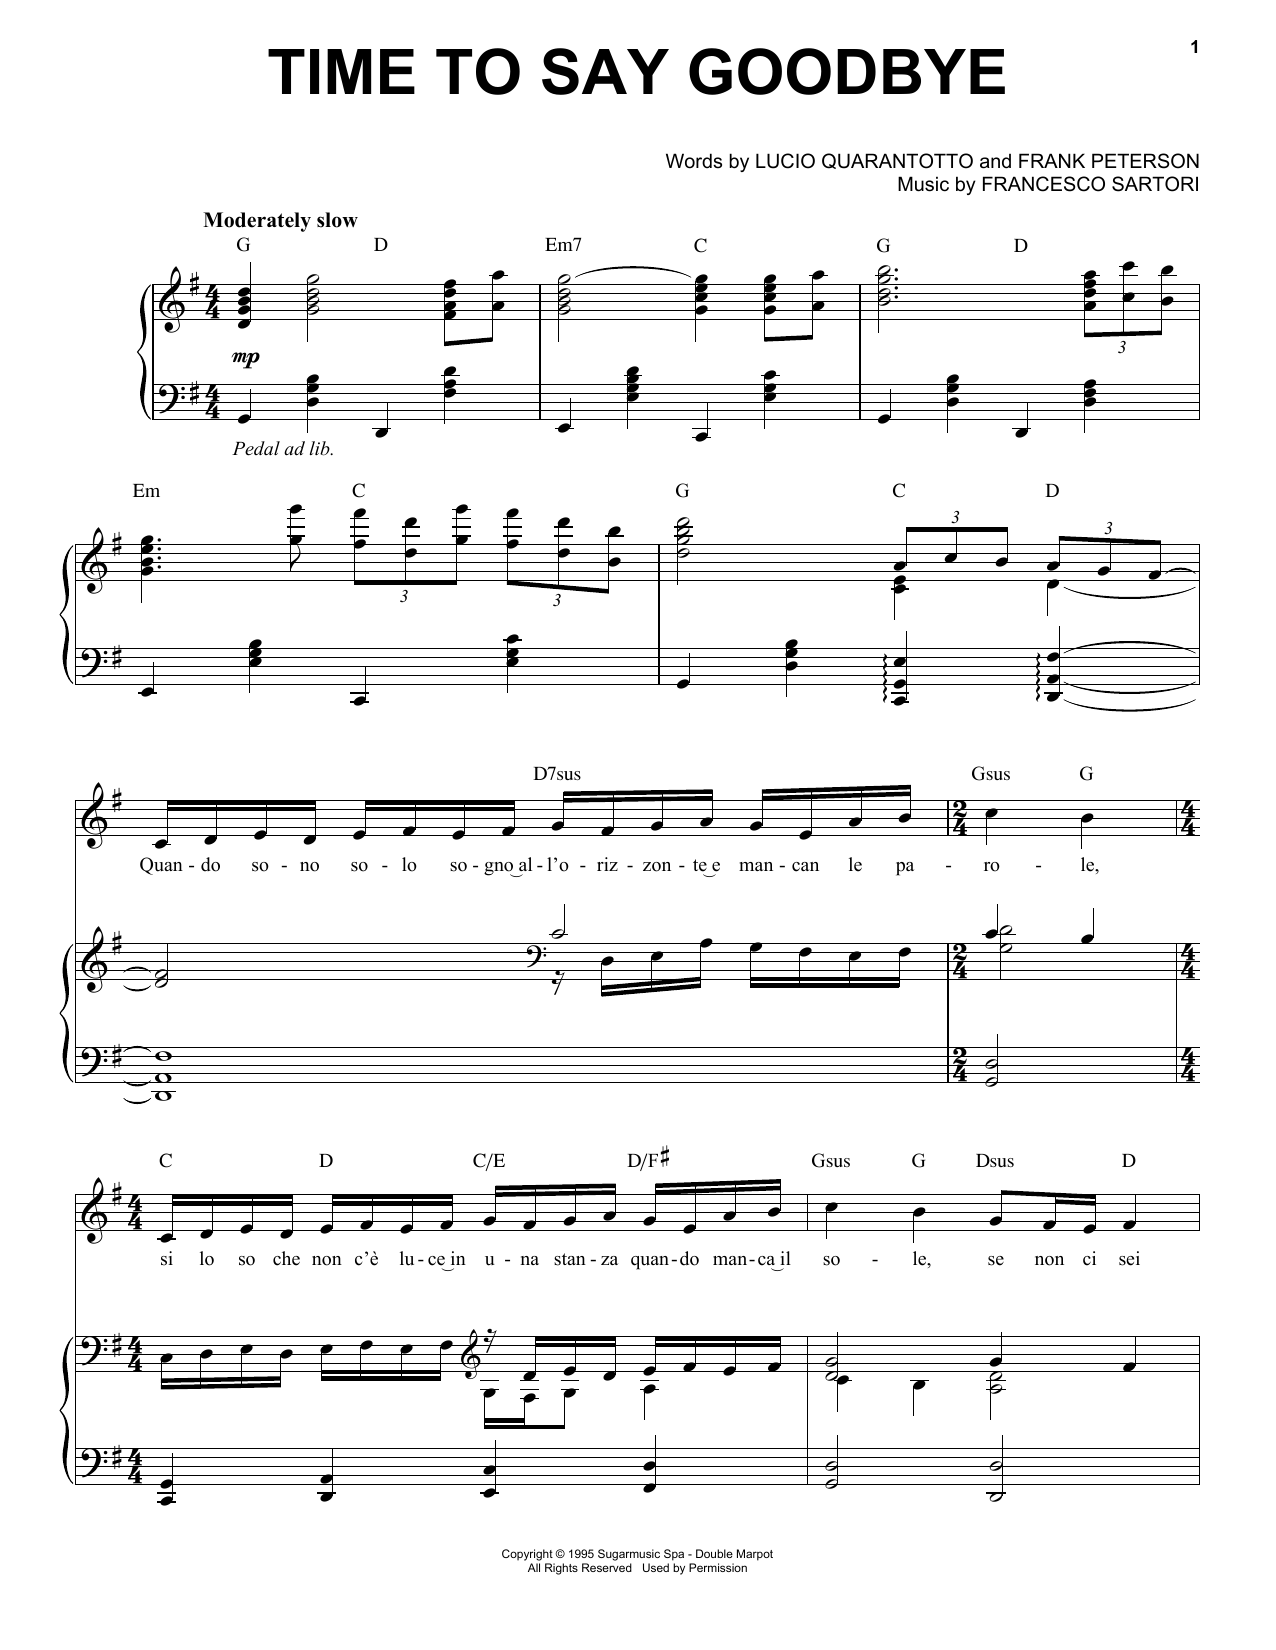 Andrea Bocelli "Time To Say Goodbye" Sheet Music PDF Notes, Chords